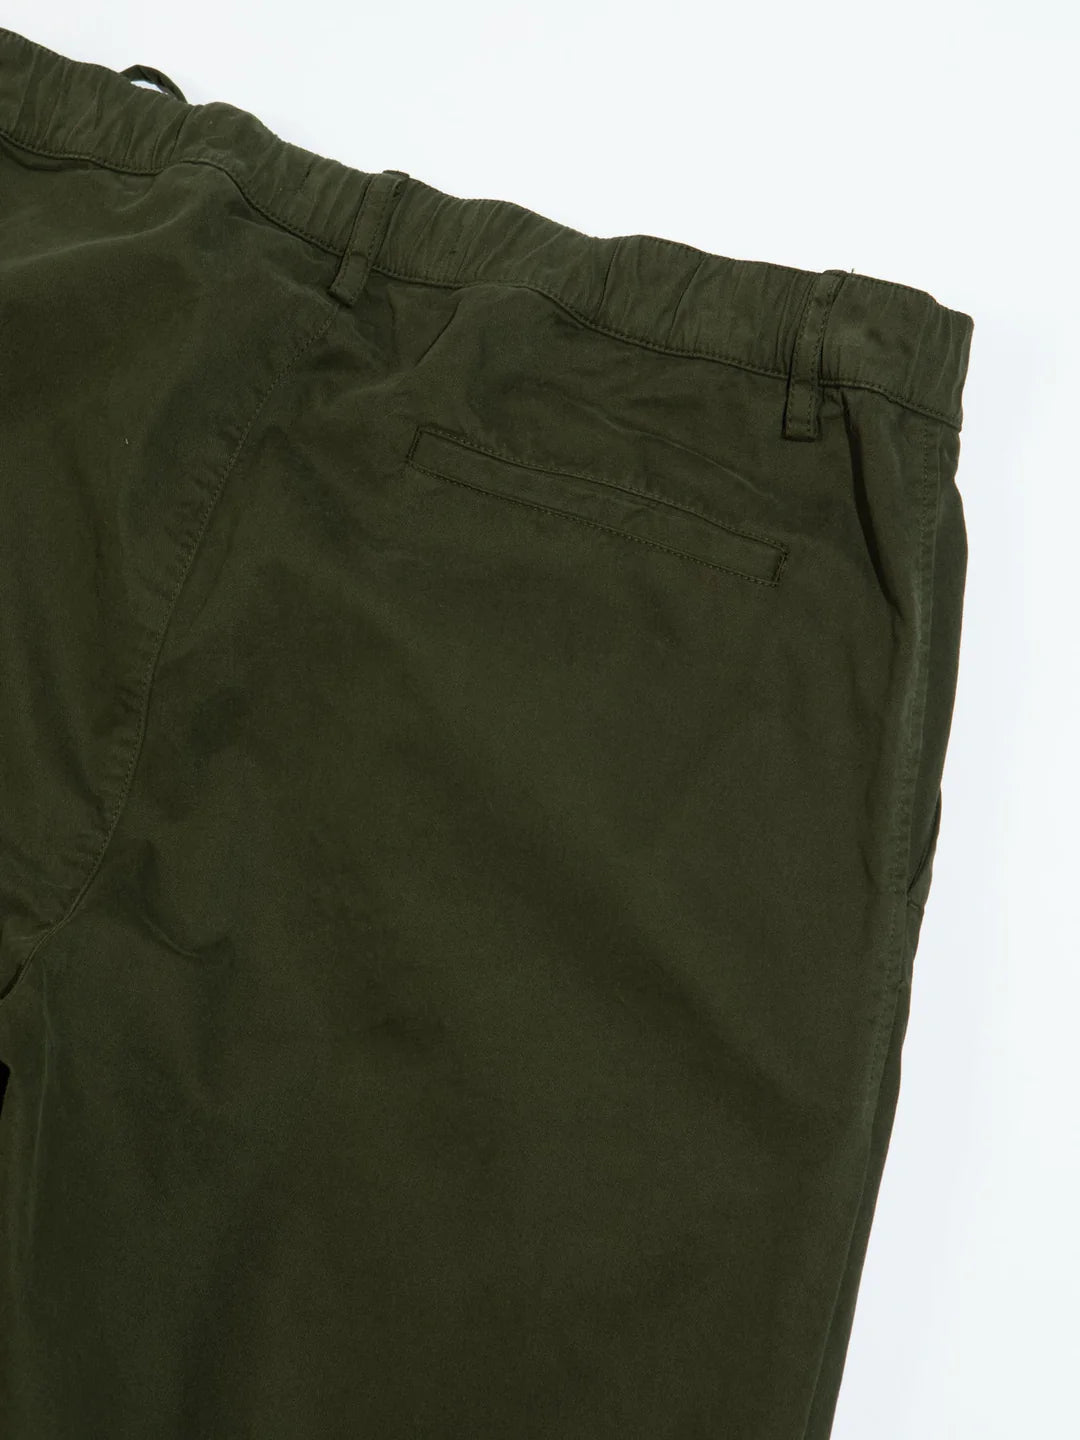 INVERNESS TAPERED COTTON TWILL PANTS - DEFENDER GREEN